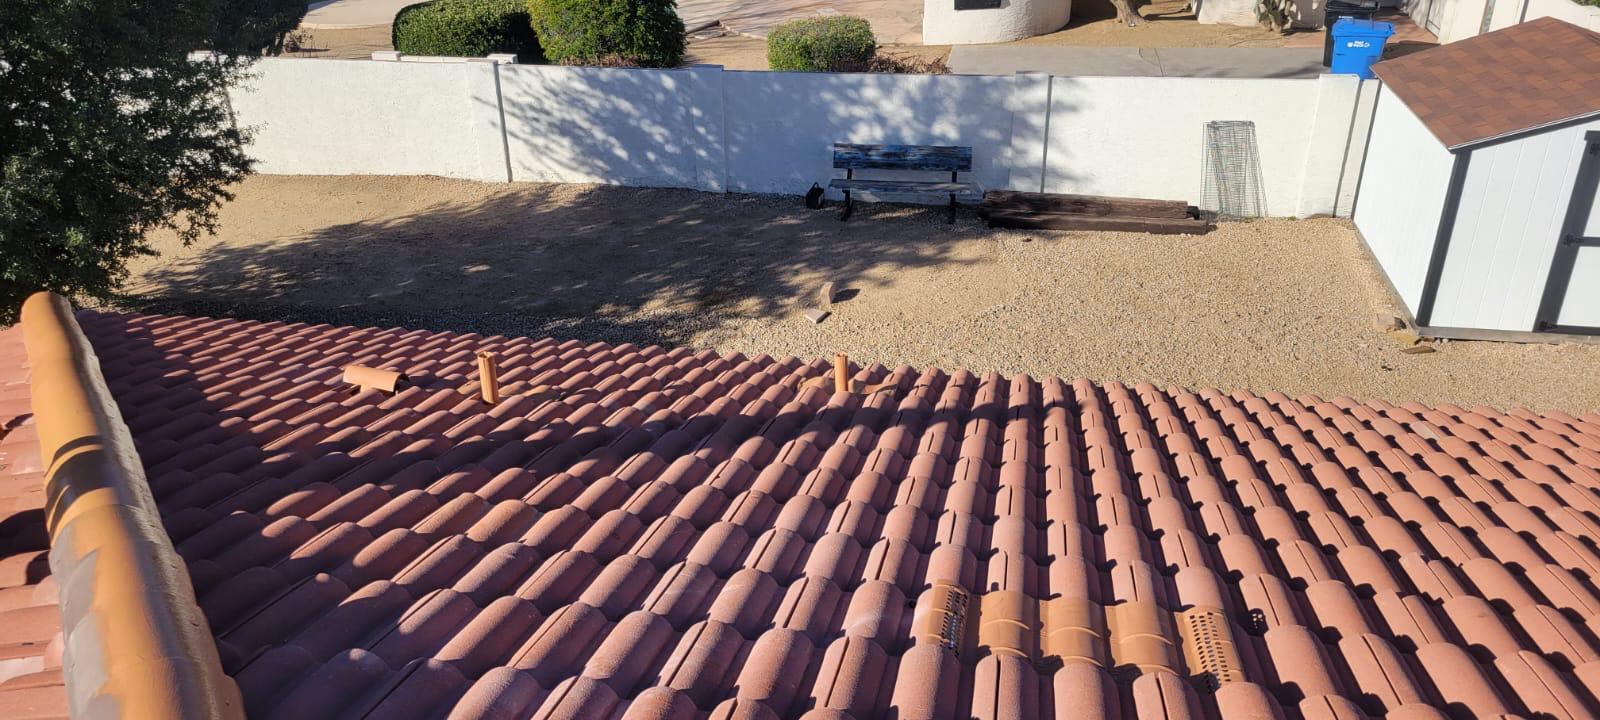 Dedicated work from Behmer Roofing team on a tile re-felting task in the serene Troon North area of Scottsdale.